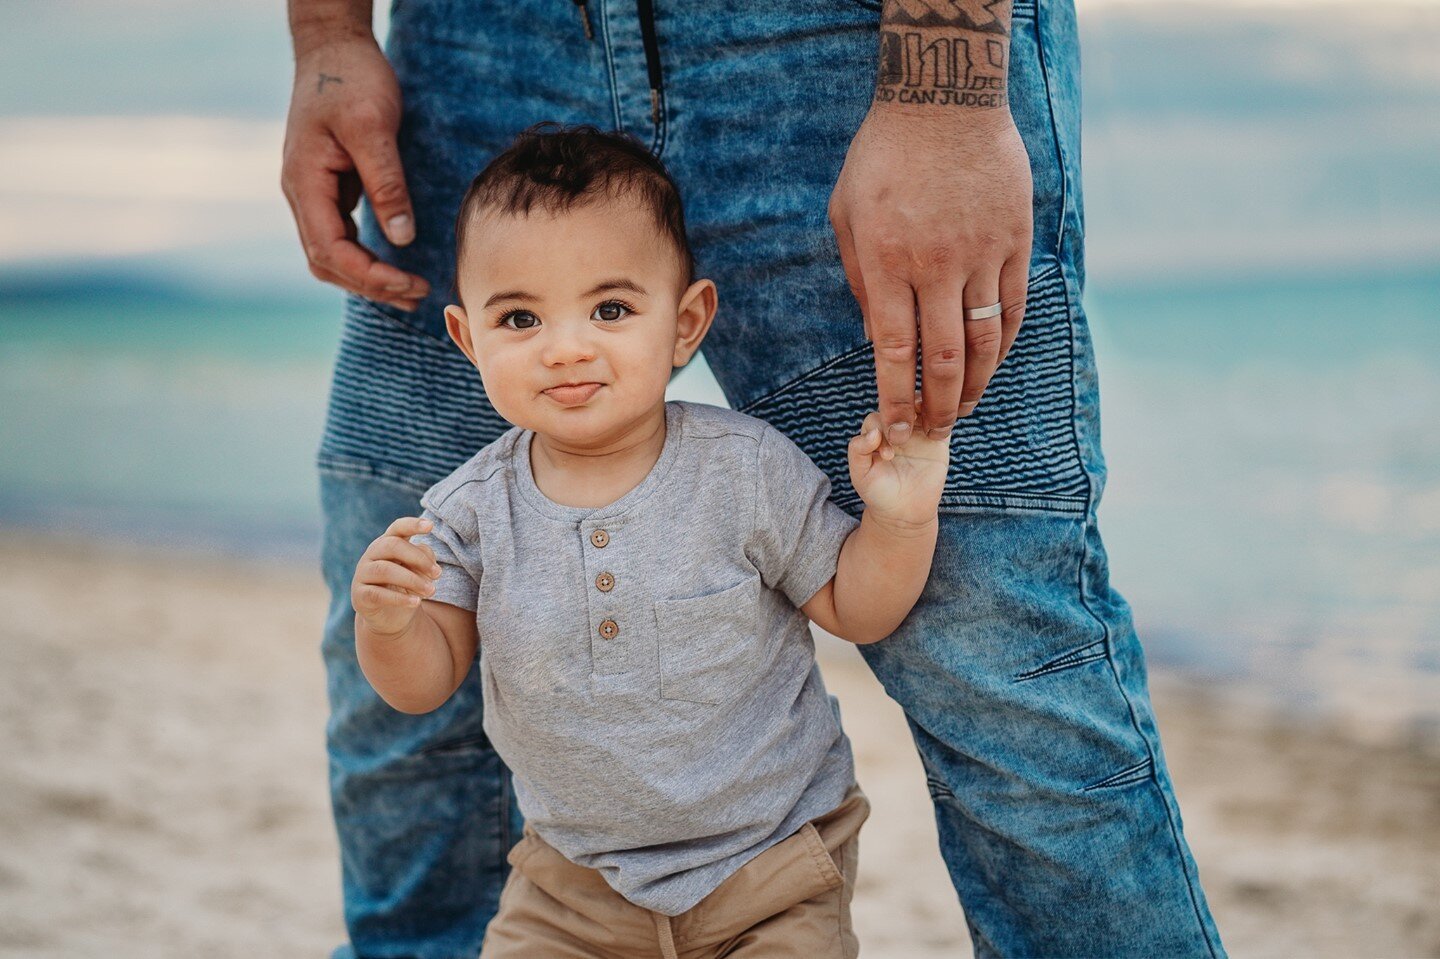 First photo I snapped from this session was this little guy. What a cutie!⁠
⁠
#childphotographer #childportrait #seaford3198 #beachsunset #beachphotoshoot #sunsetportrait #familyphotography #familyphotoshoot #seafordbeach #familyphotographer #beachph